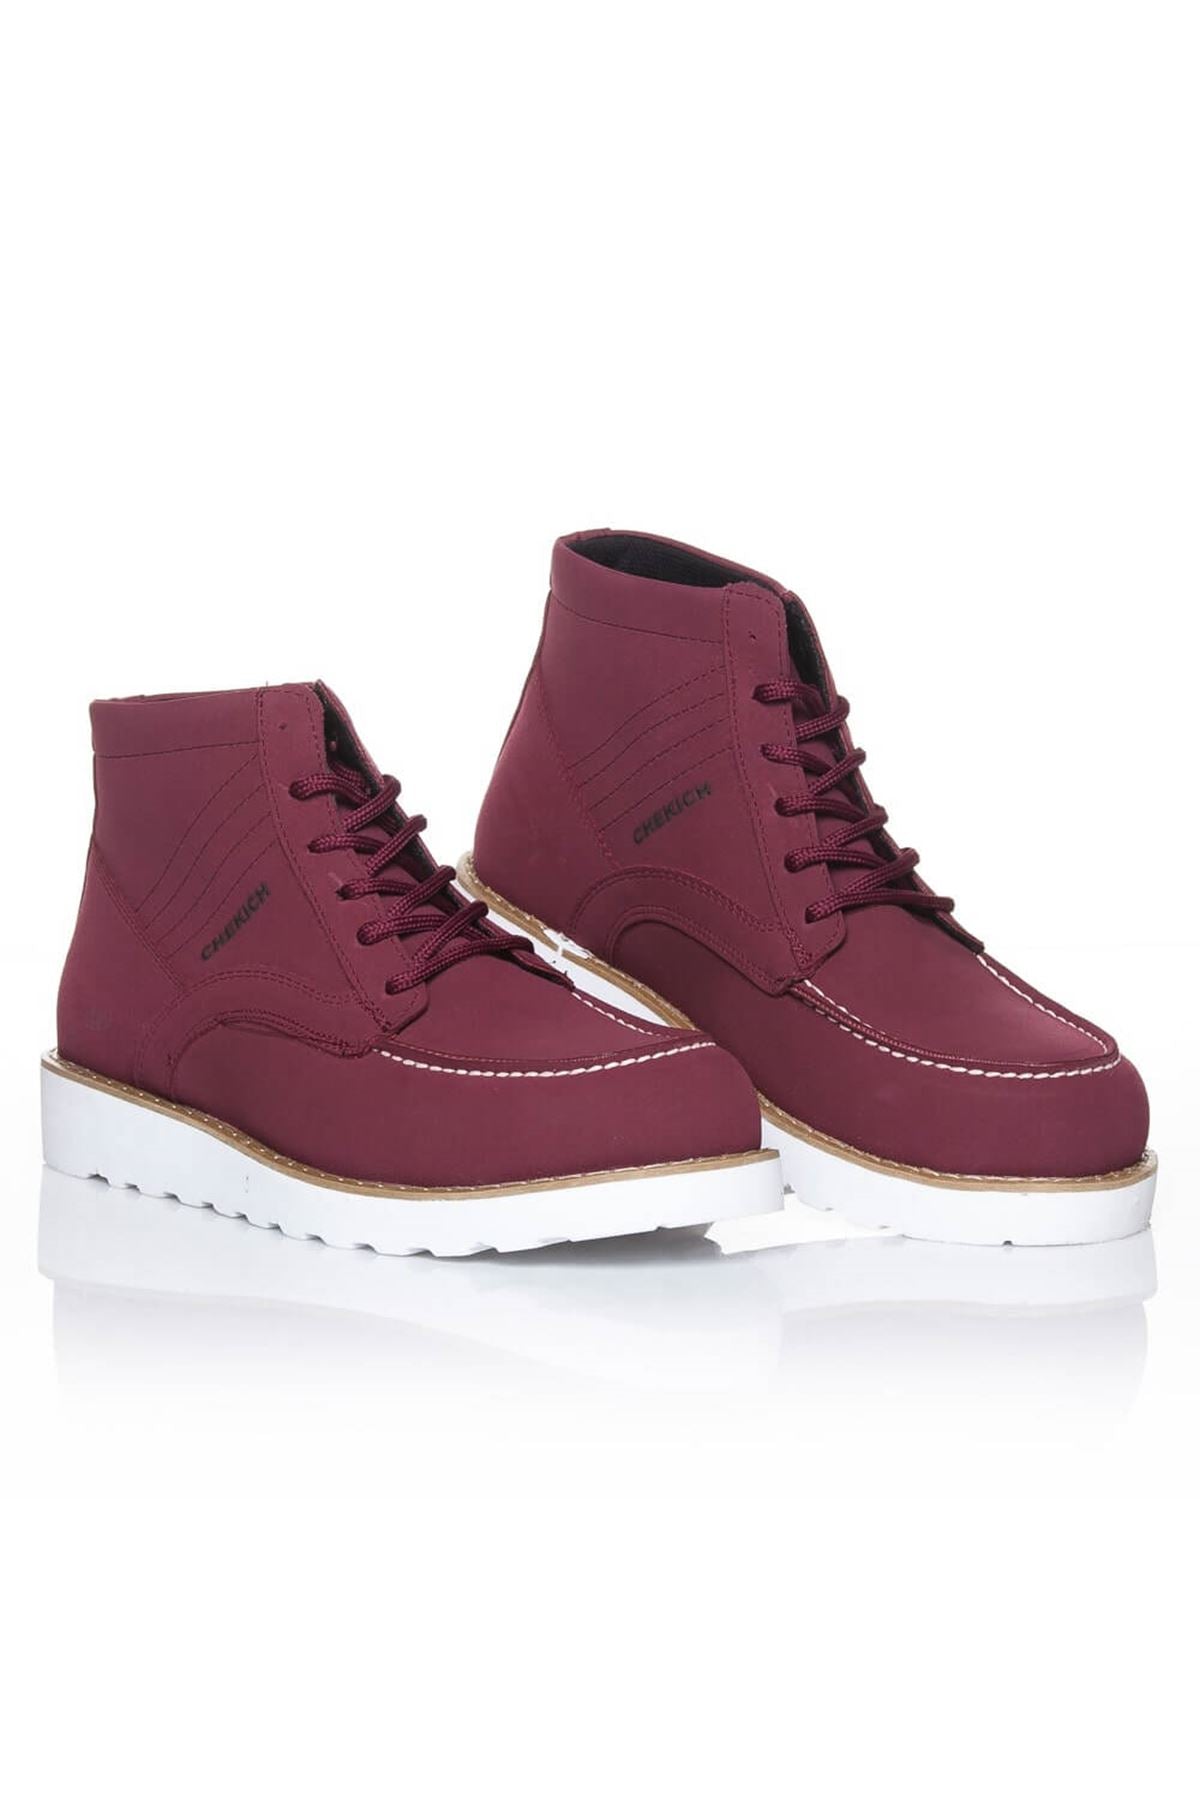 CH047 Men's Burgundy-White Sole Lace-Up Sneaker Sports Boots - STREET MODE ™